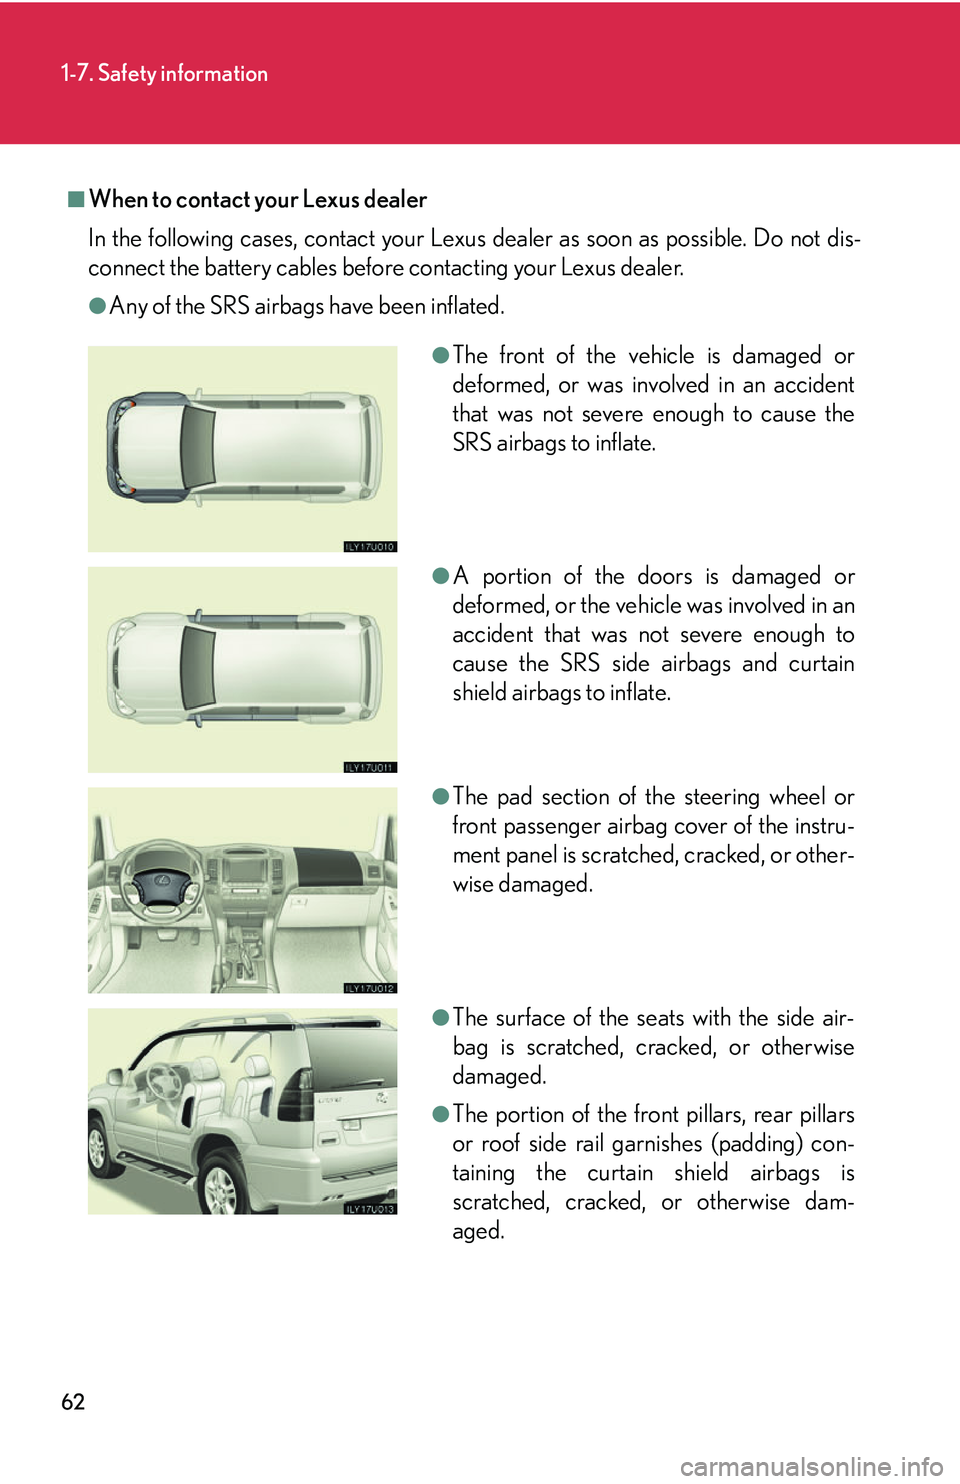 Lexus GX470 2007  Instrument cluster / LEXUS 2007 GX470 OWNERS MANUAL (OM60C64U) 62
1-7. Safety information
■When to contact your Lexus dealer
In the following cases, contact your Lexus dealer as soon as possible. Do not dis-
connect the battery cables before contacting your Lex